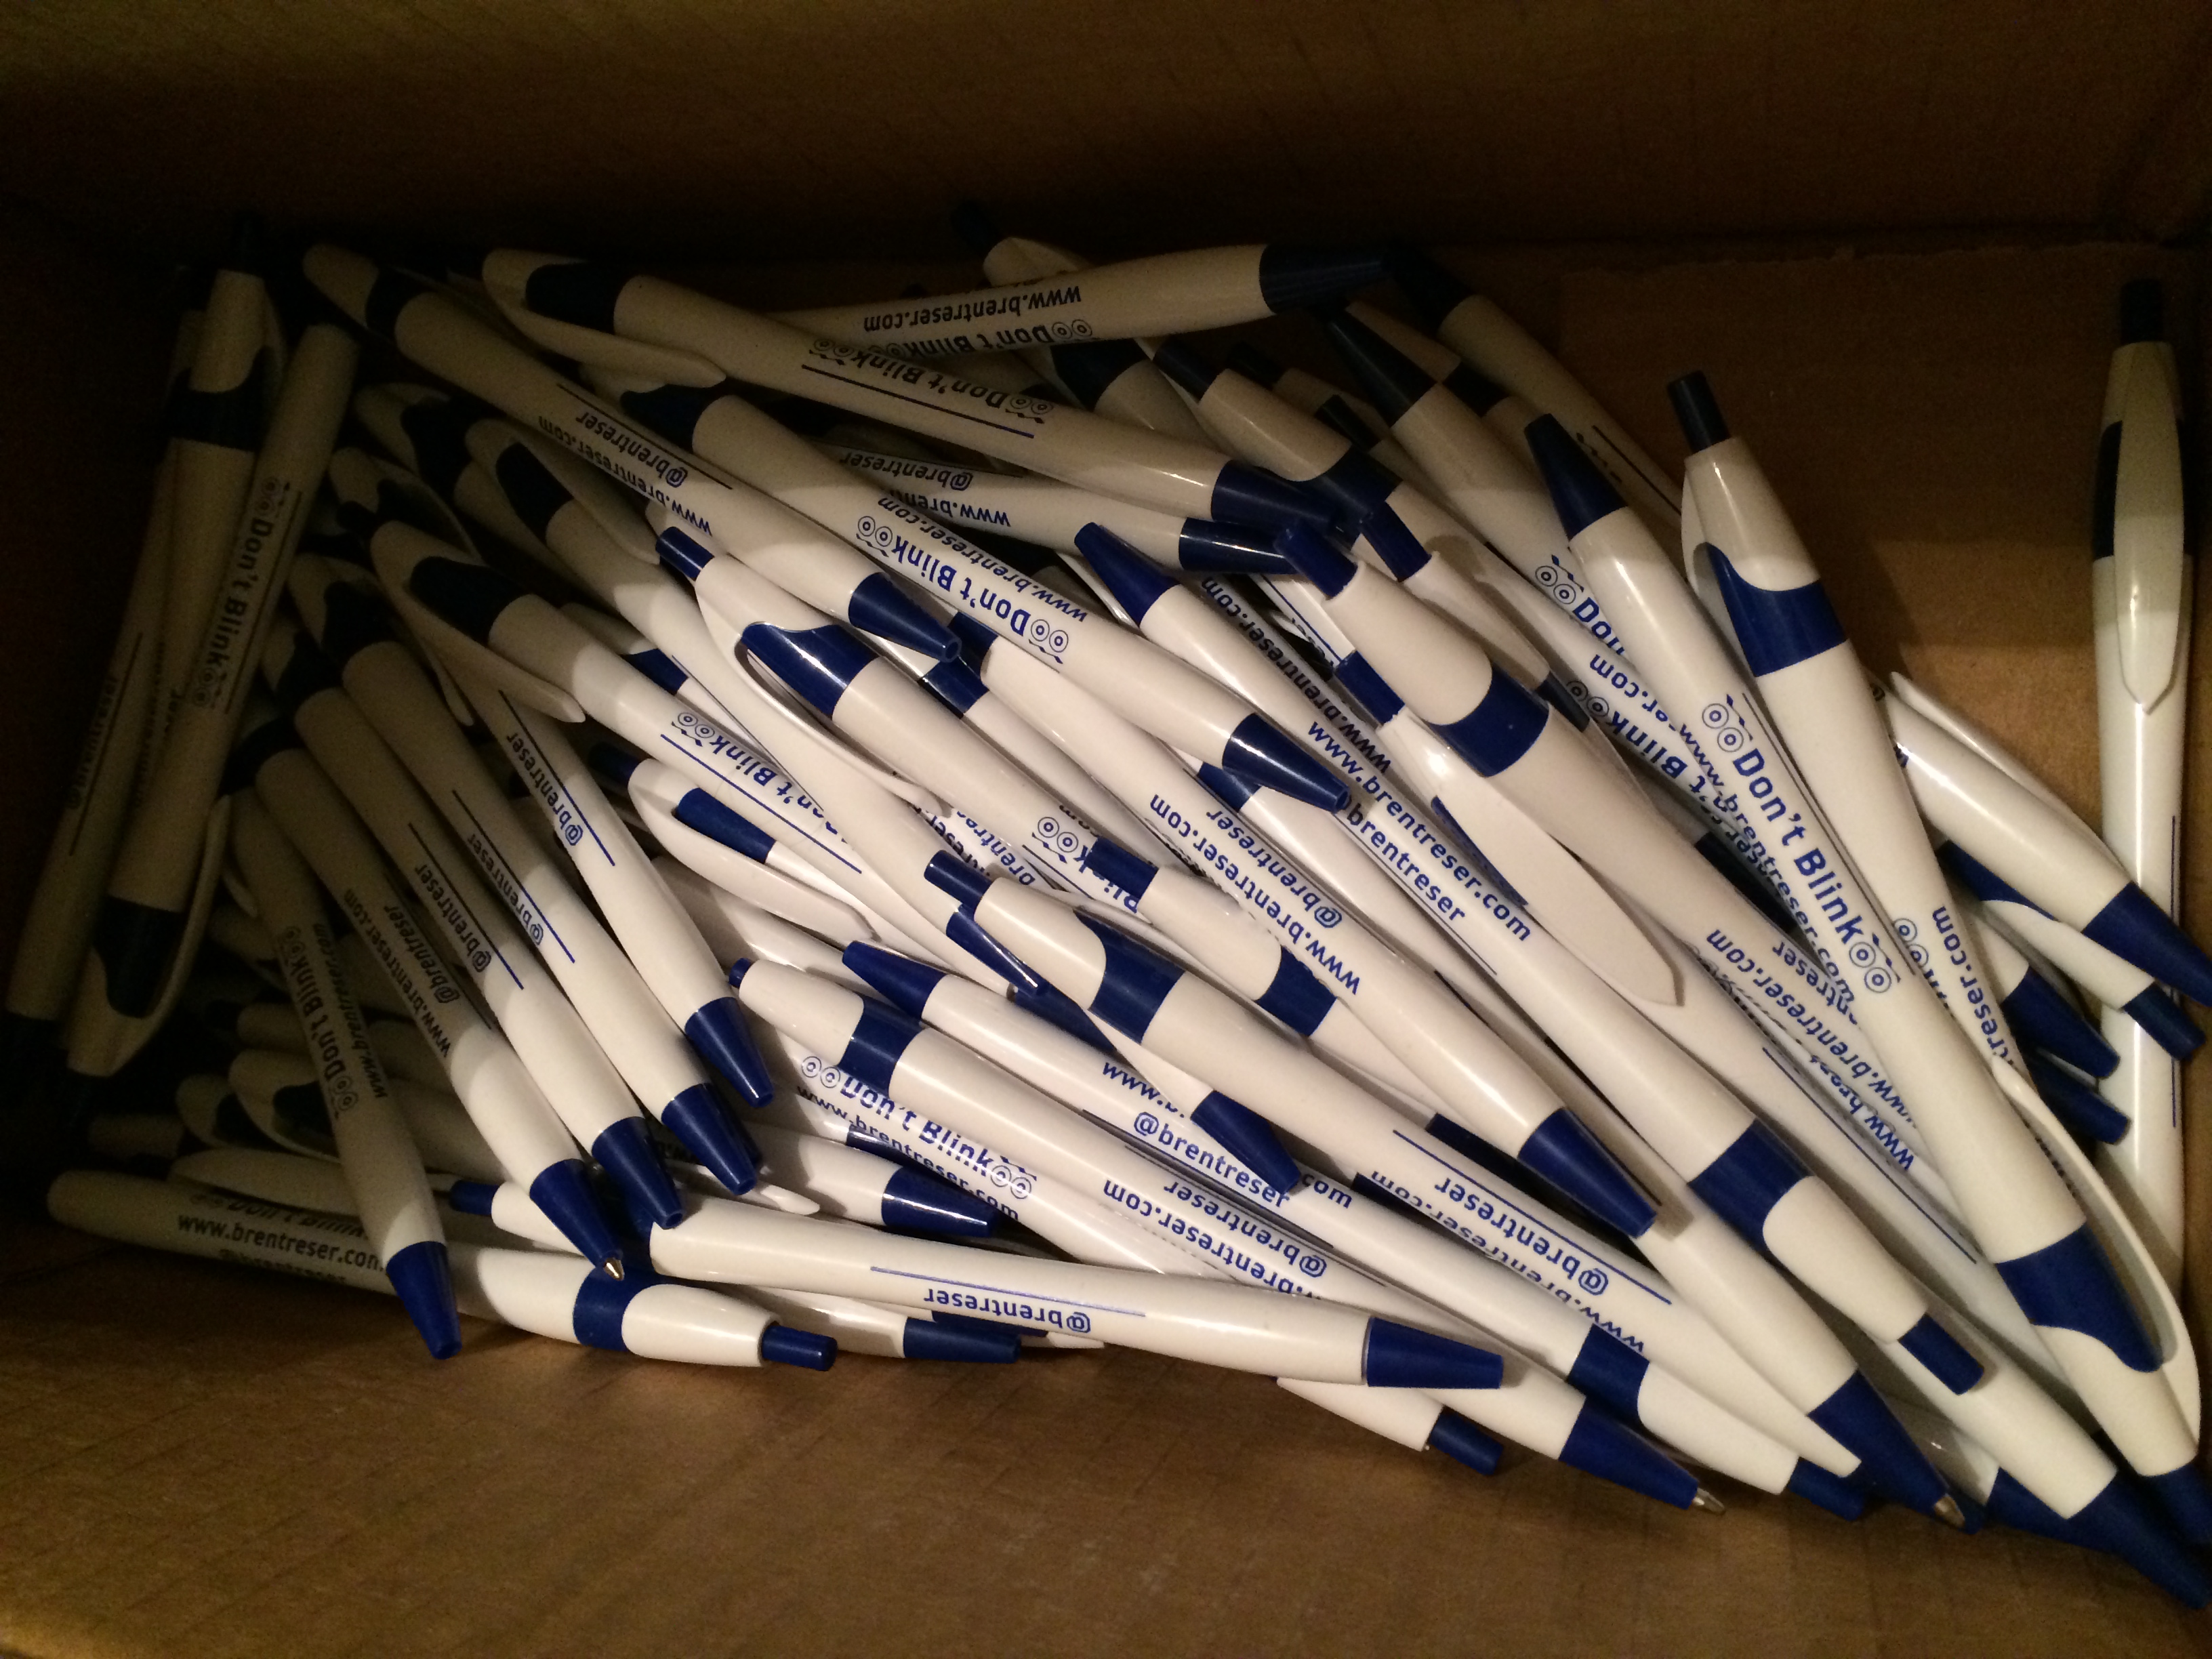 Surprisingly, I still have a lot of pens left in my cardboard box.